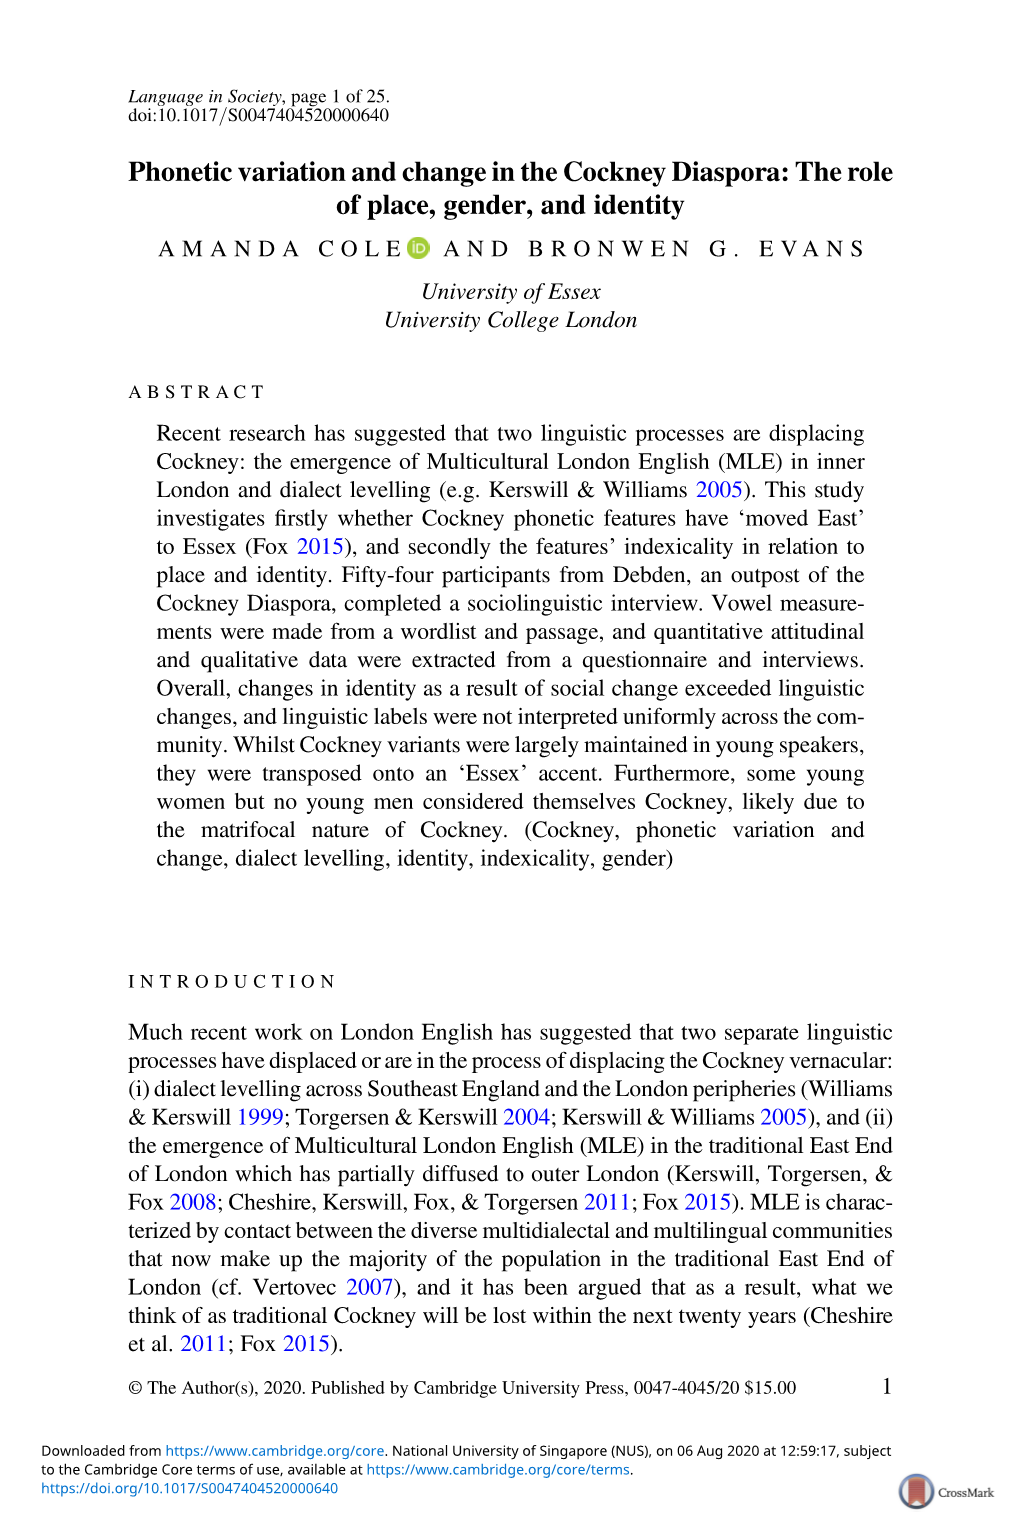 Phonetic Variation and Change in the Cockney Diaspora: the Role of Place, Gender, and Identity AMANDA COLE and BRONWEN G